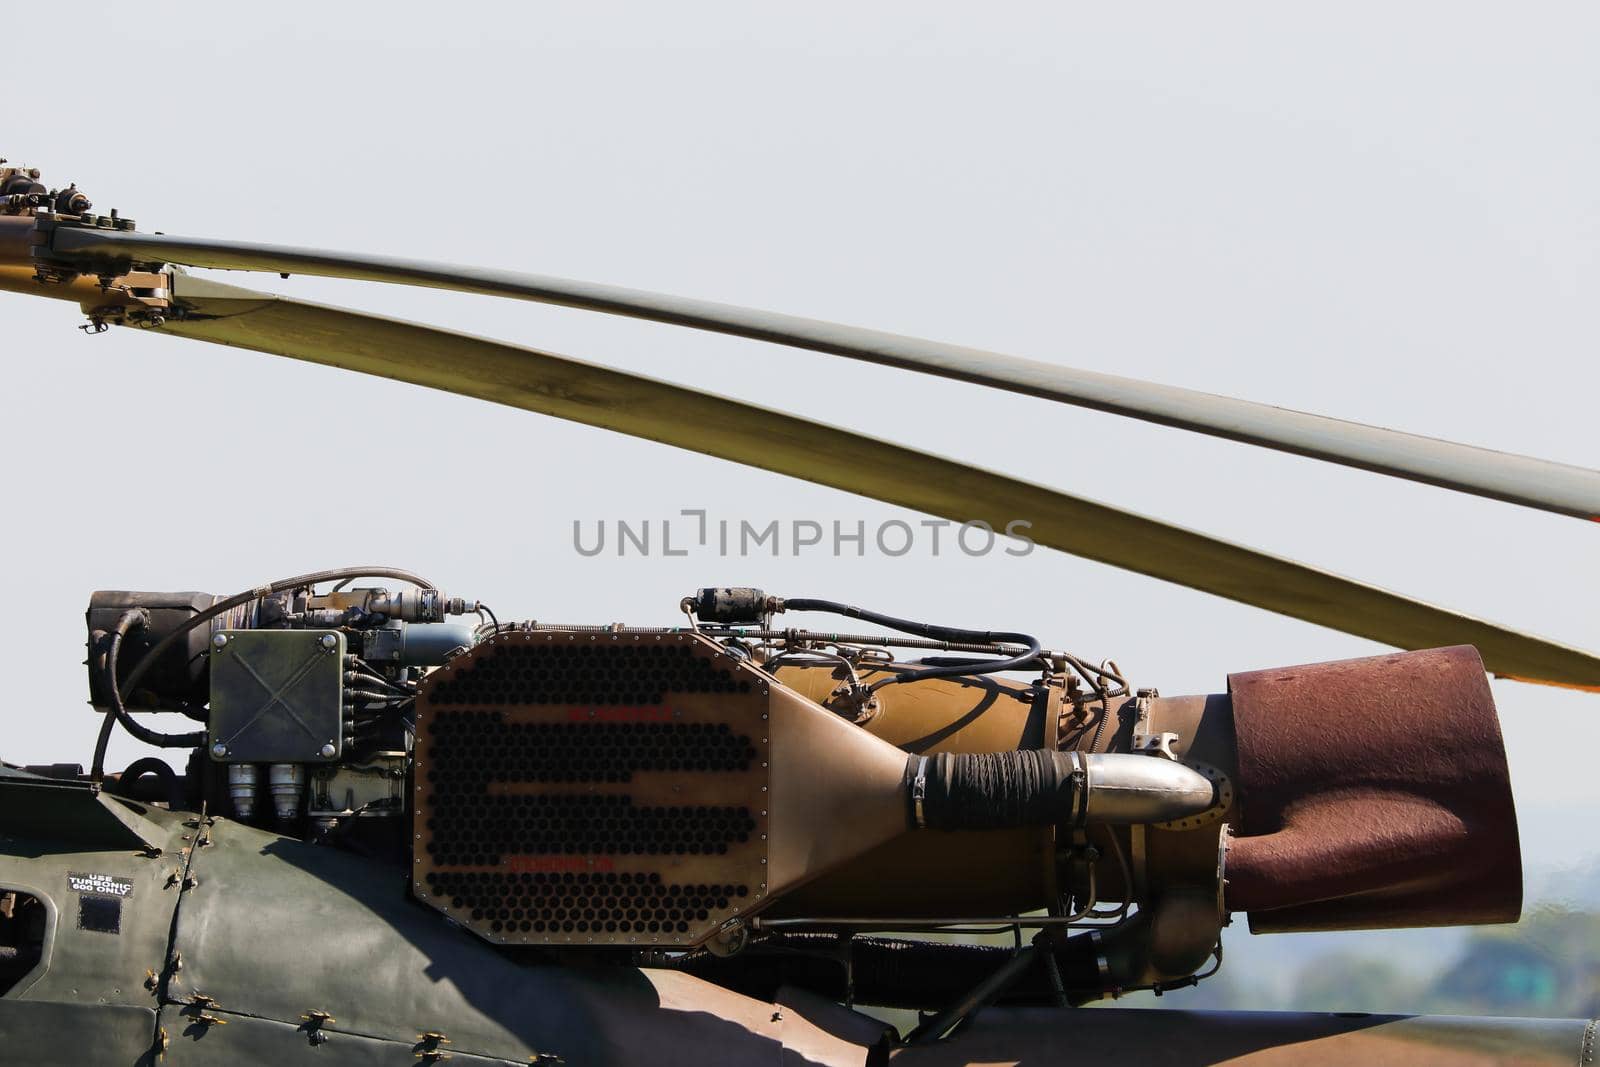 Alouette III Helicopter Engine Close-up With Blades by jjvanginkel